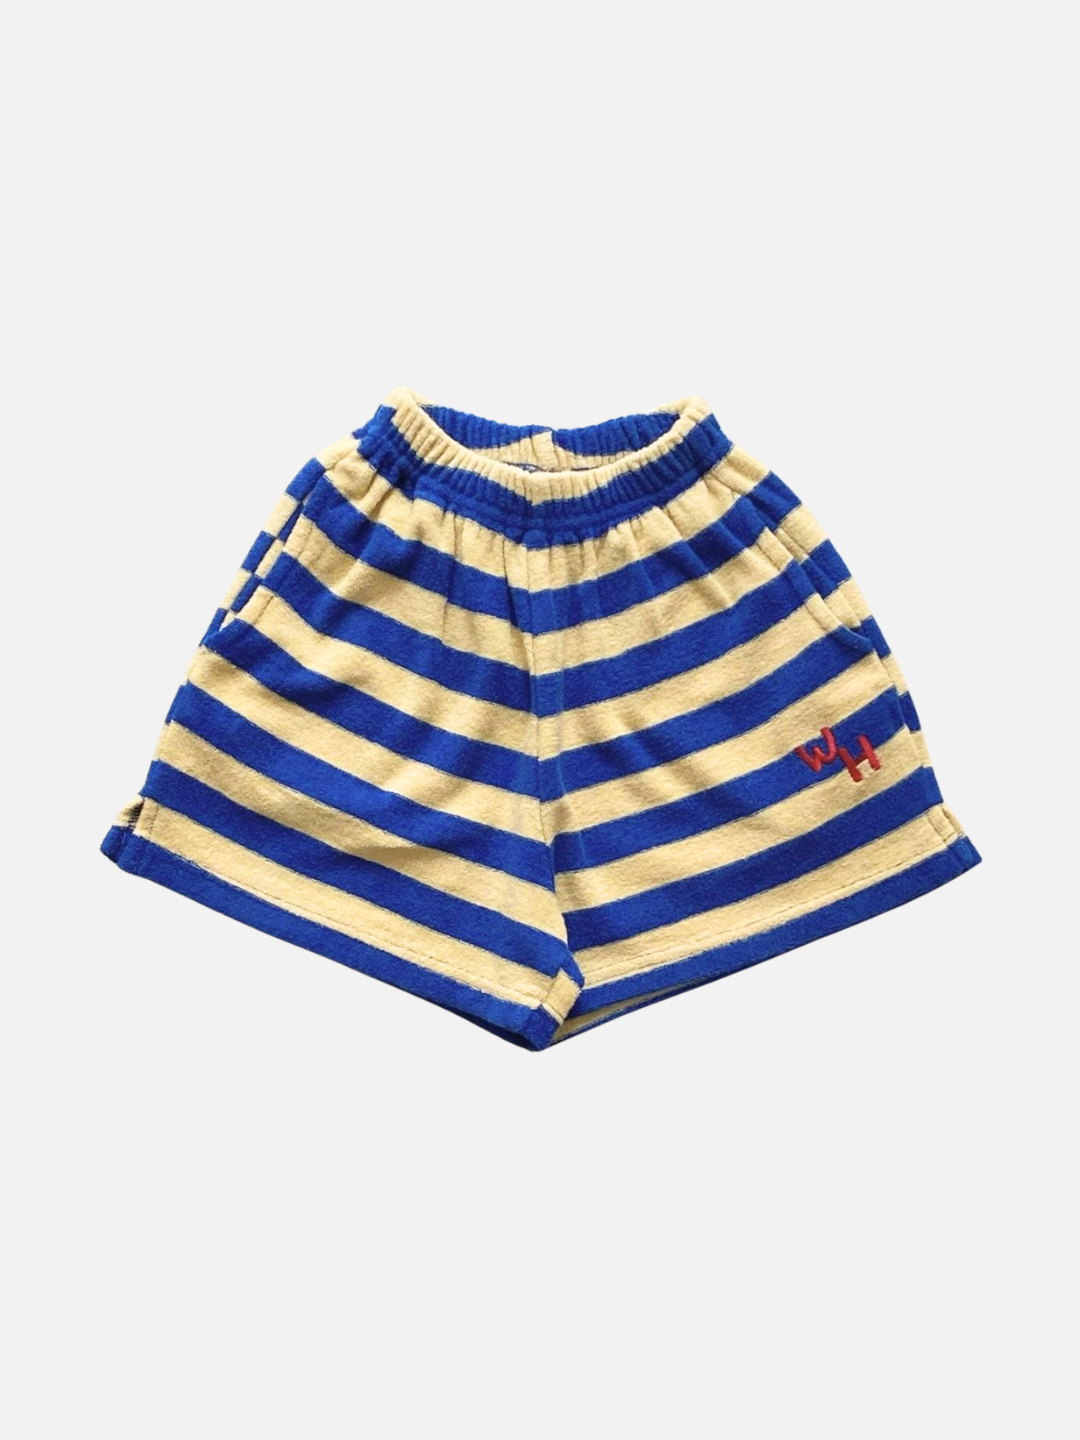 A front view of kid's Riviera Shorts in blue/yellow stripe